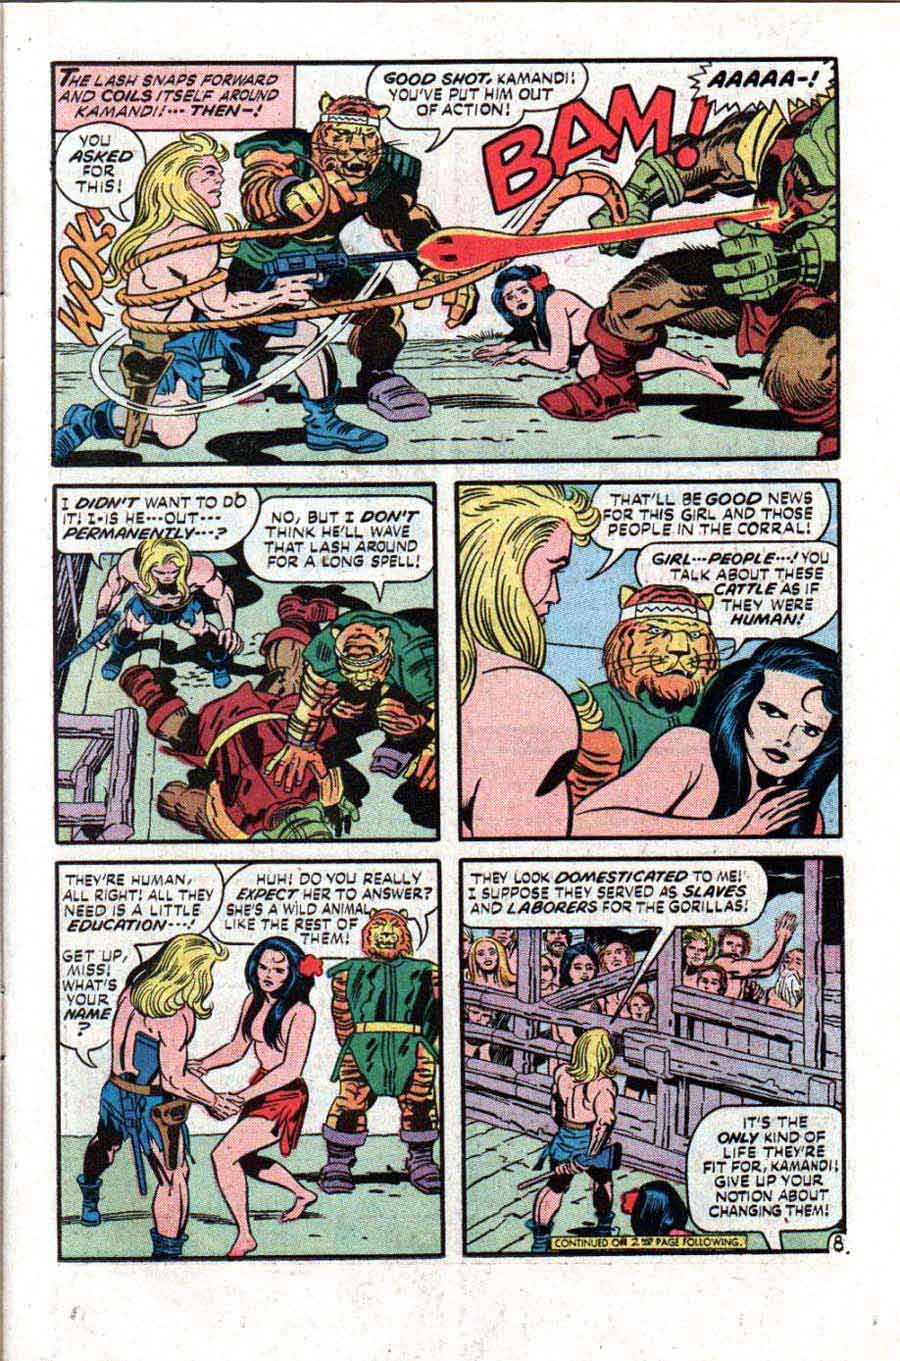 Kamandi v1 #5 dc 1970s bronze age comic book page art by Jack Kirby, Mike Royer